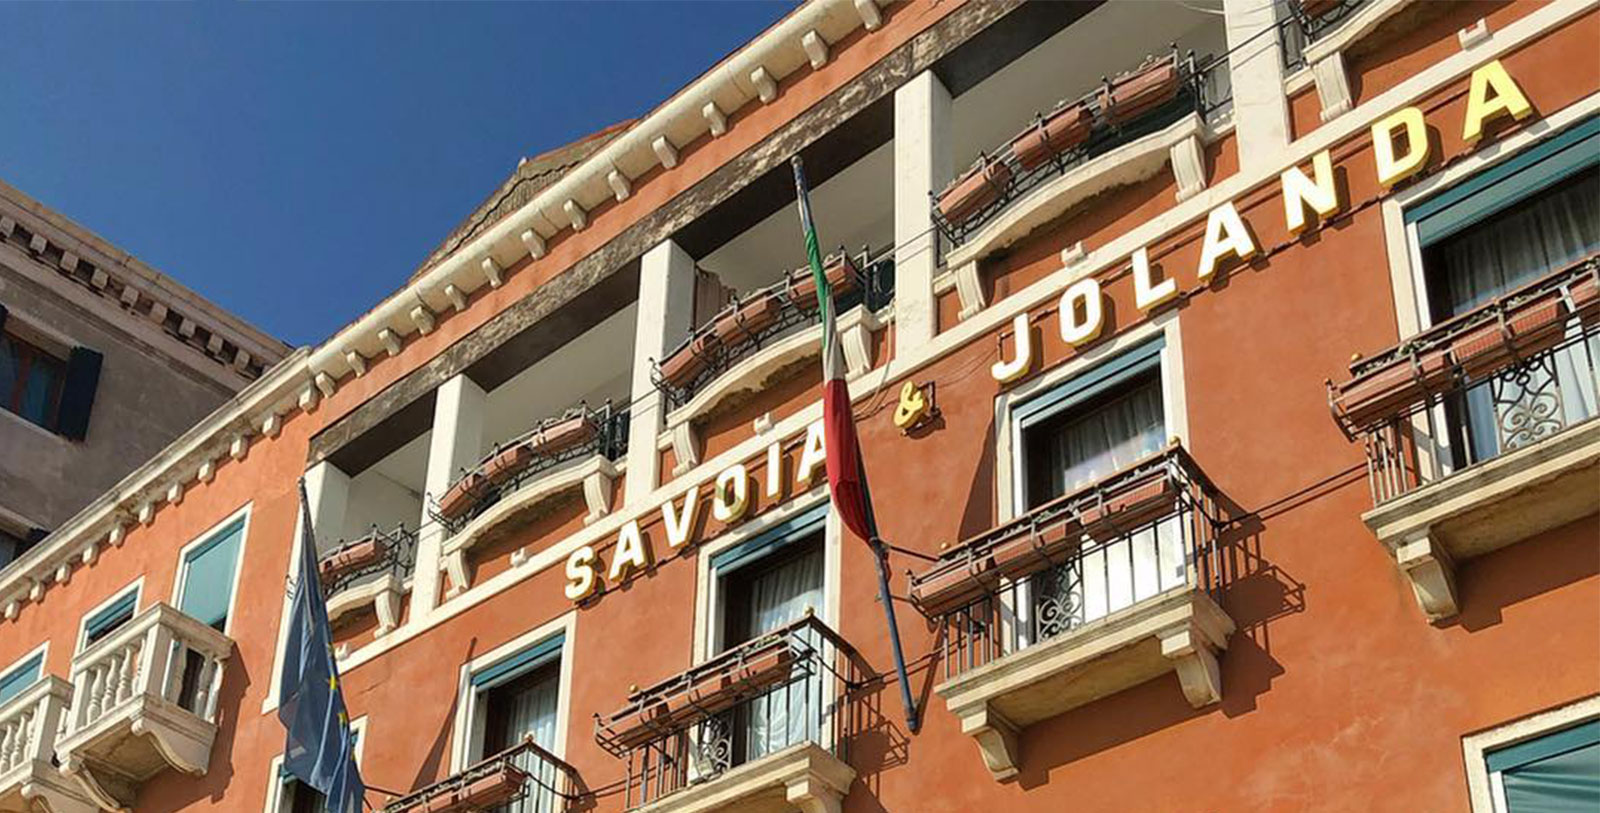 Image of exterior at Hotel Savoia & Jolanda, 19th century, a member of Historic Hotels Worldwide in Venice, Italy